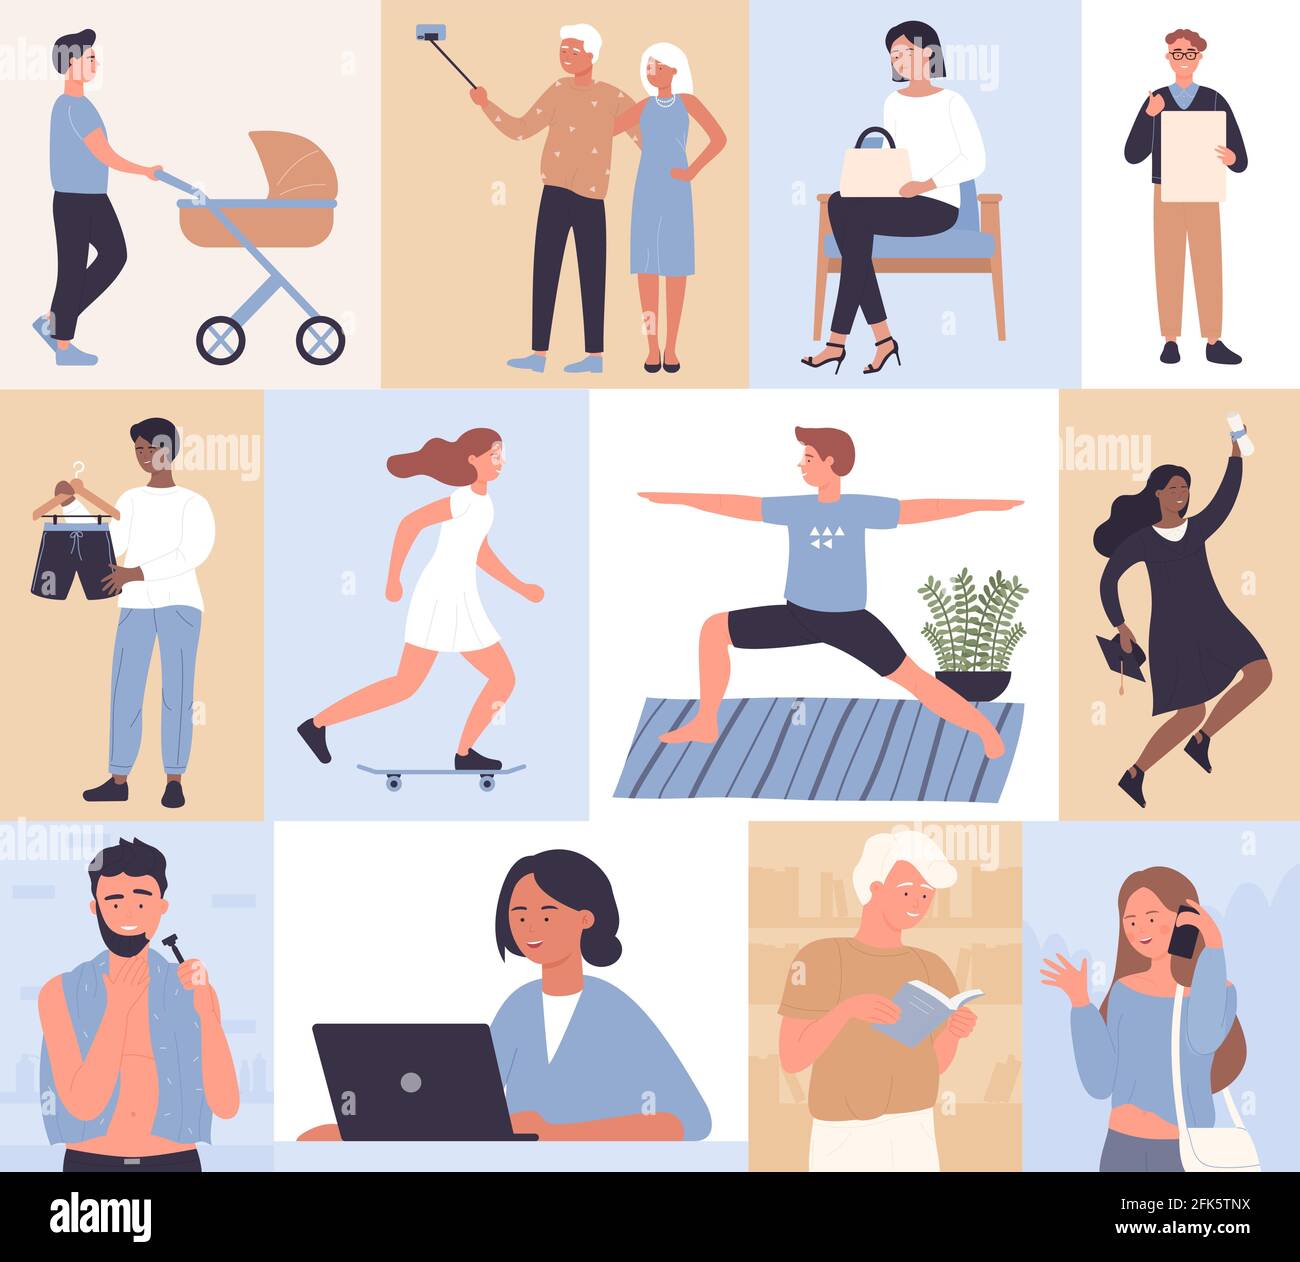 People daily activity set, active everyday life routine scenes, male female characters Stock Vector